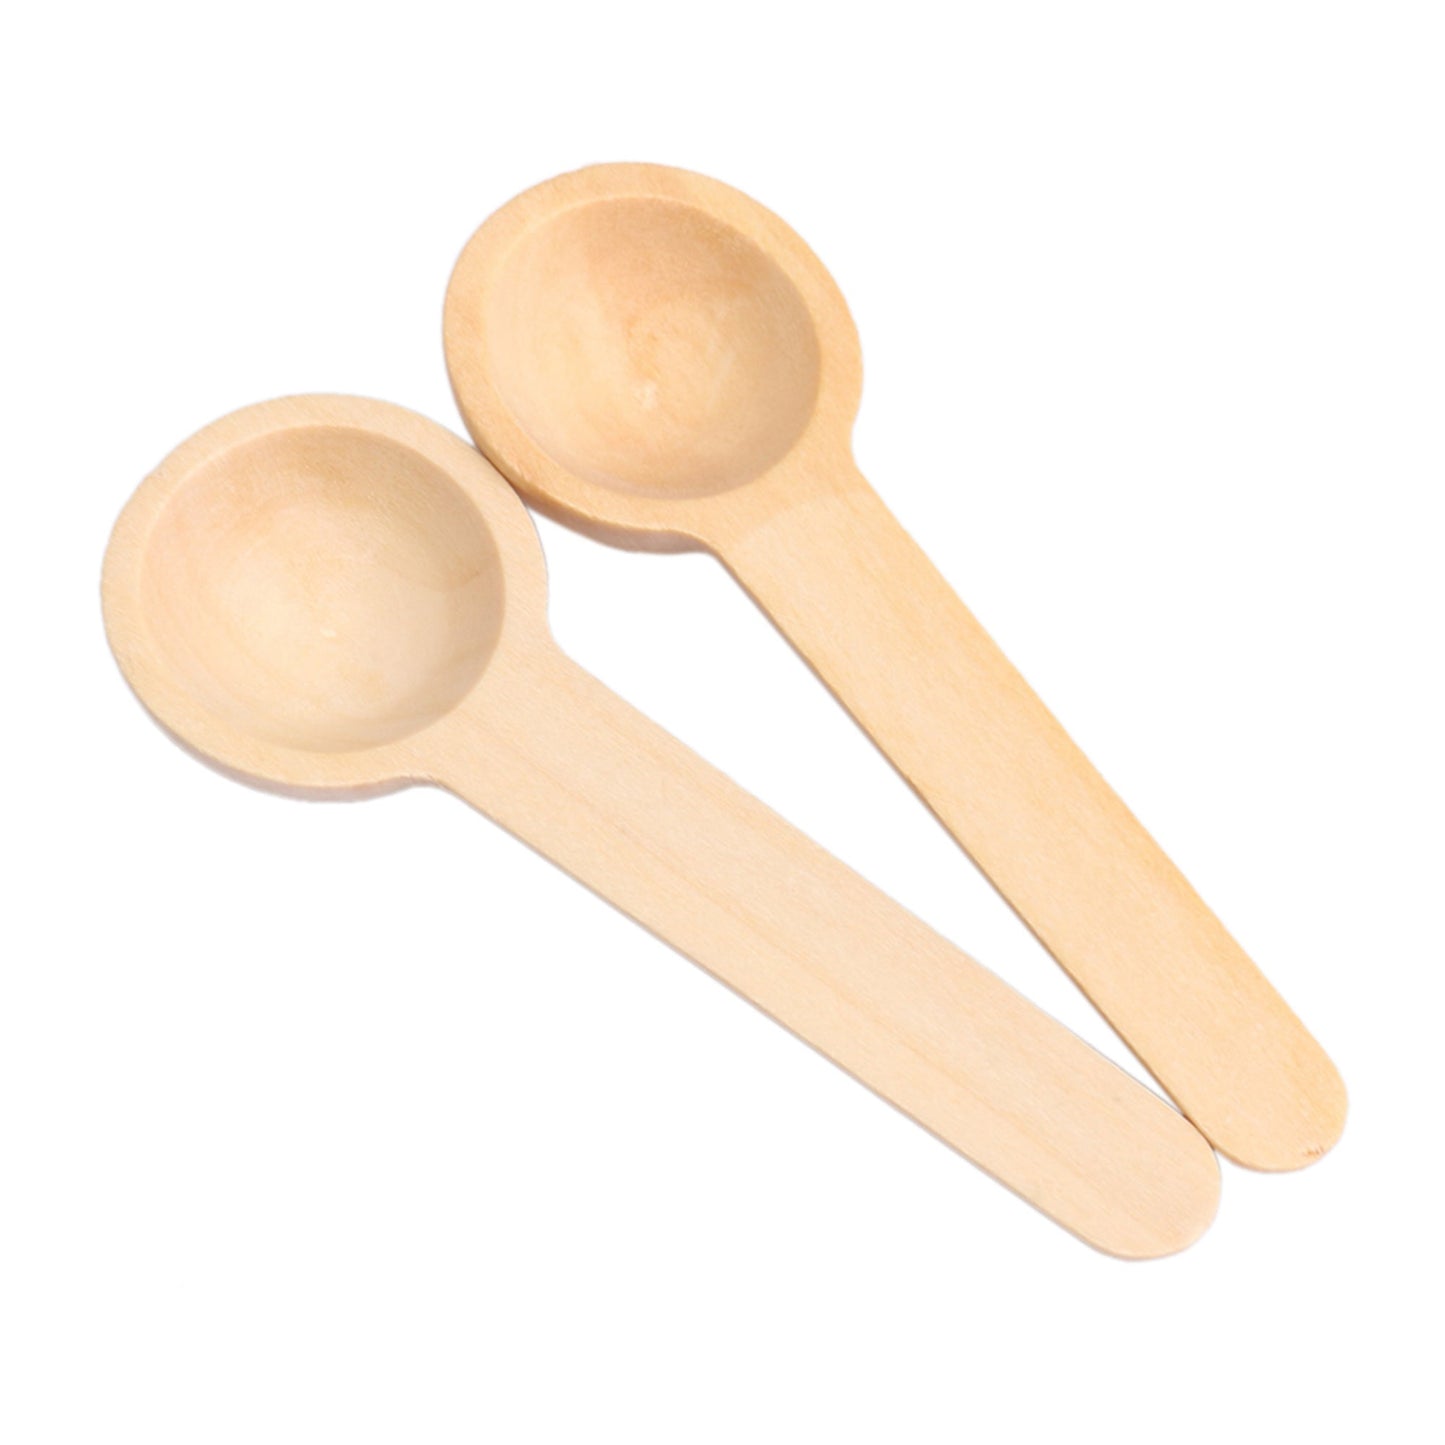 BQLZR 7.5x2.4x1.3cm Small Round Wooden Kitchen Spoons for Salt Seasoning Honey Coffee Spoon Pack of 50